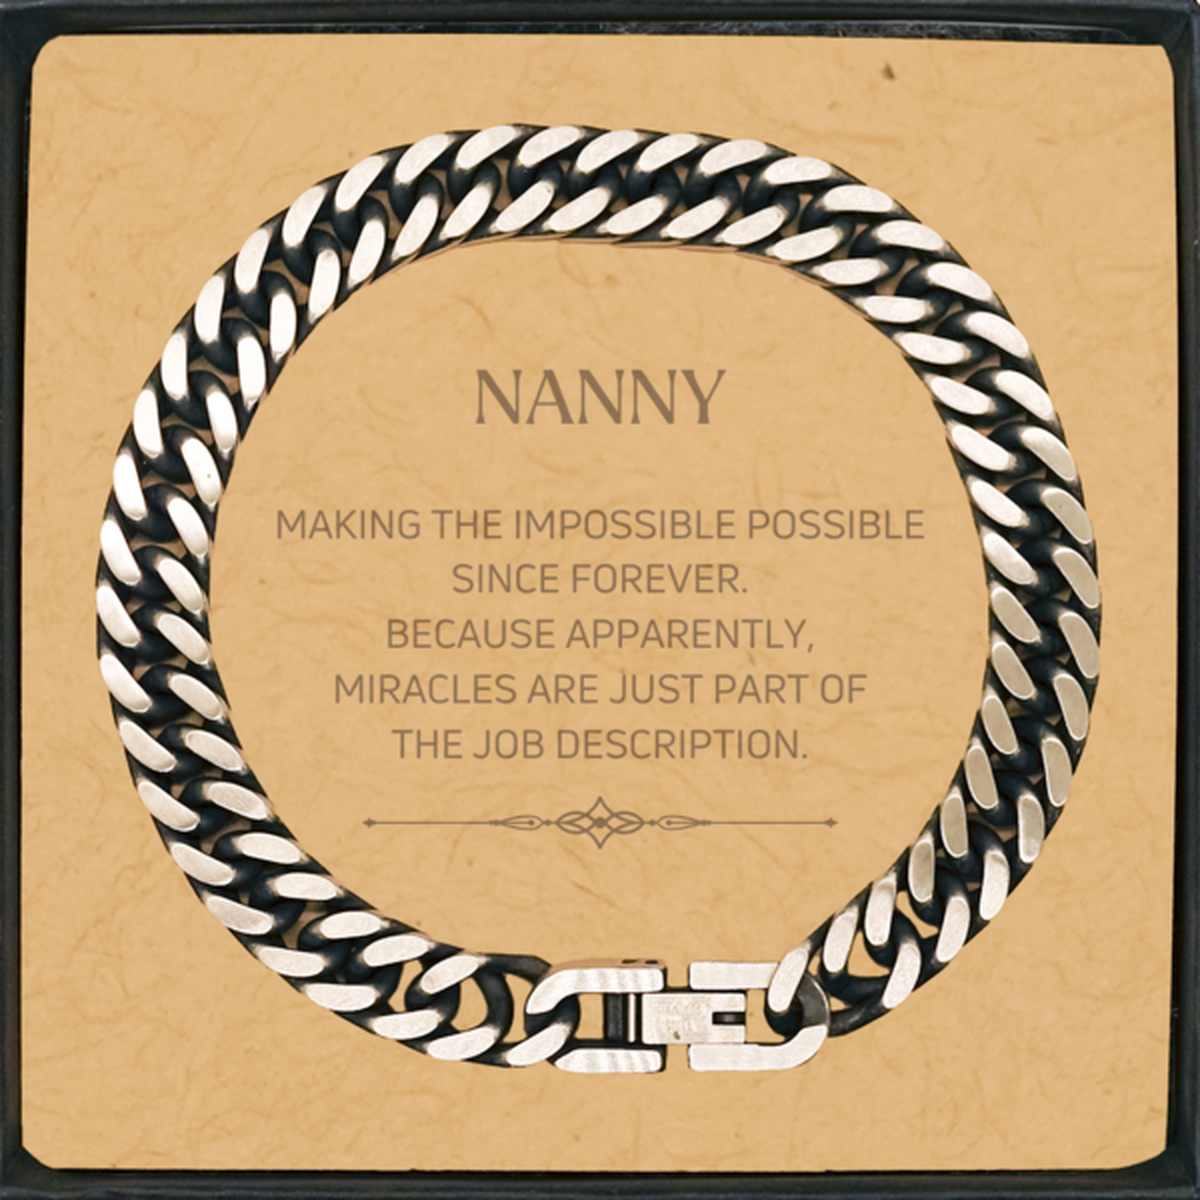 Funny Nanny Gifts, Miracles are just part of the job description, Inspirational Birthday Cuban Link Chain Bracelet For Nanny, Men, Women, Coworkers, Friends, Boss